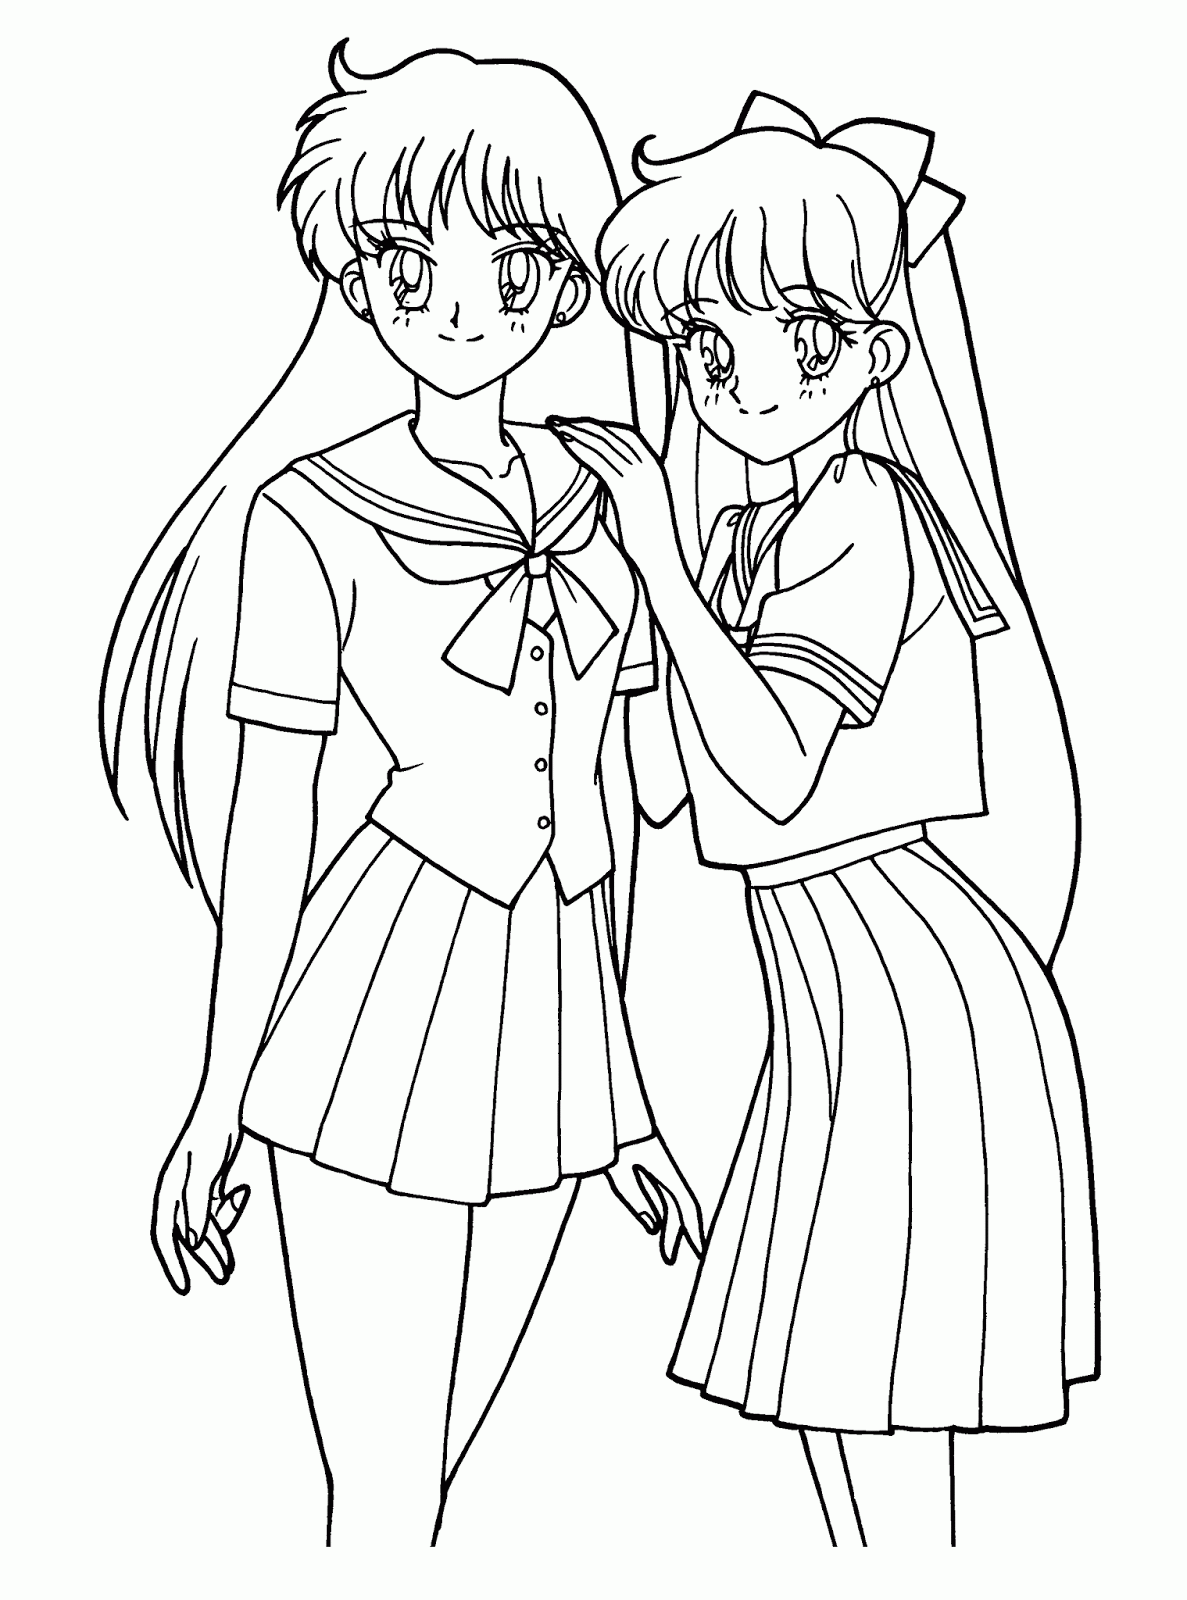 Anime Girlss Coloring Page